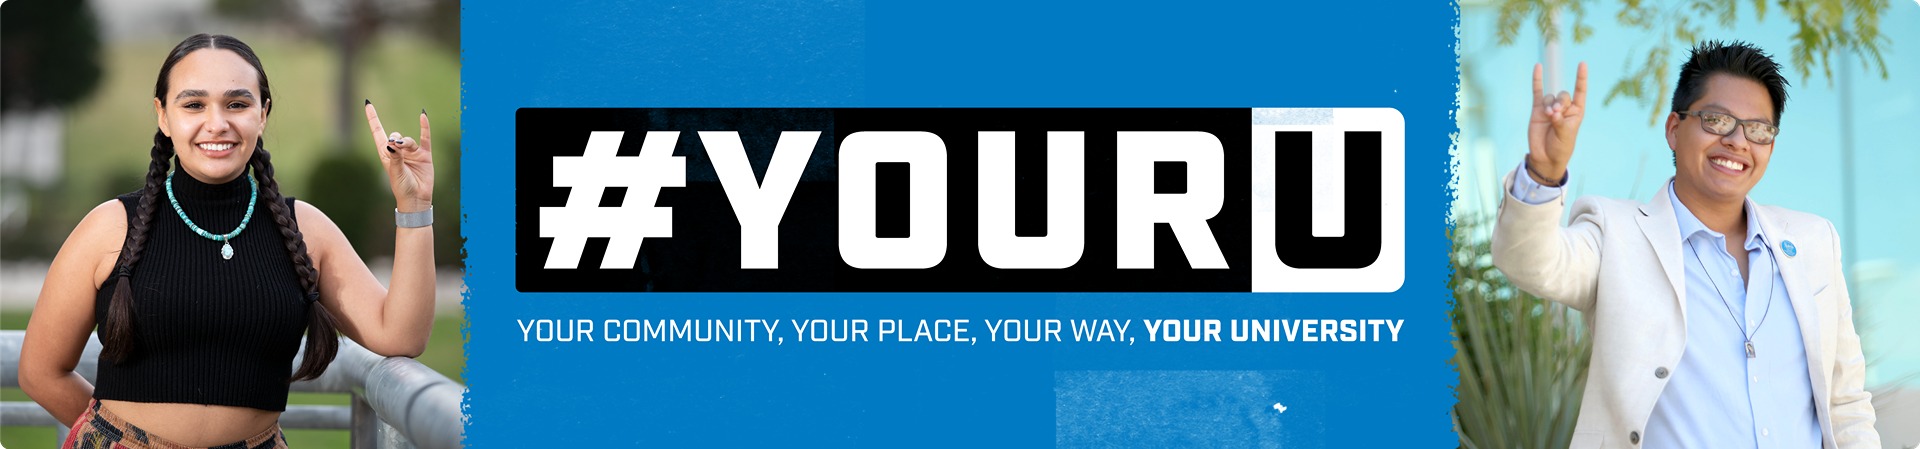 #YourU Your Community, Your Place, Your Way, Your University